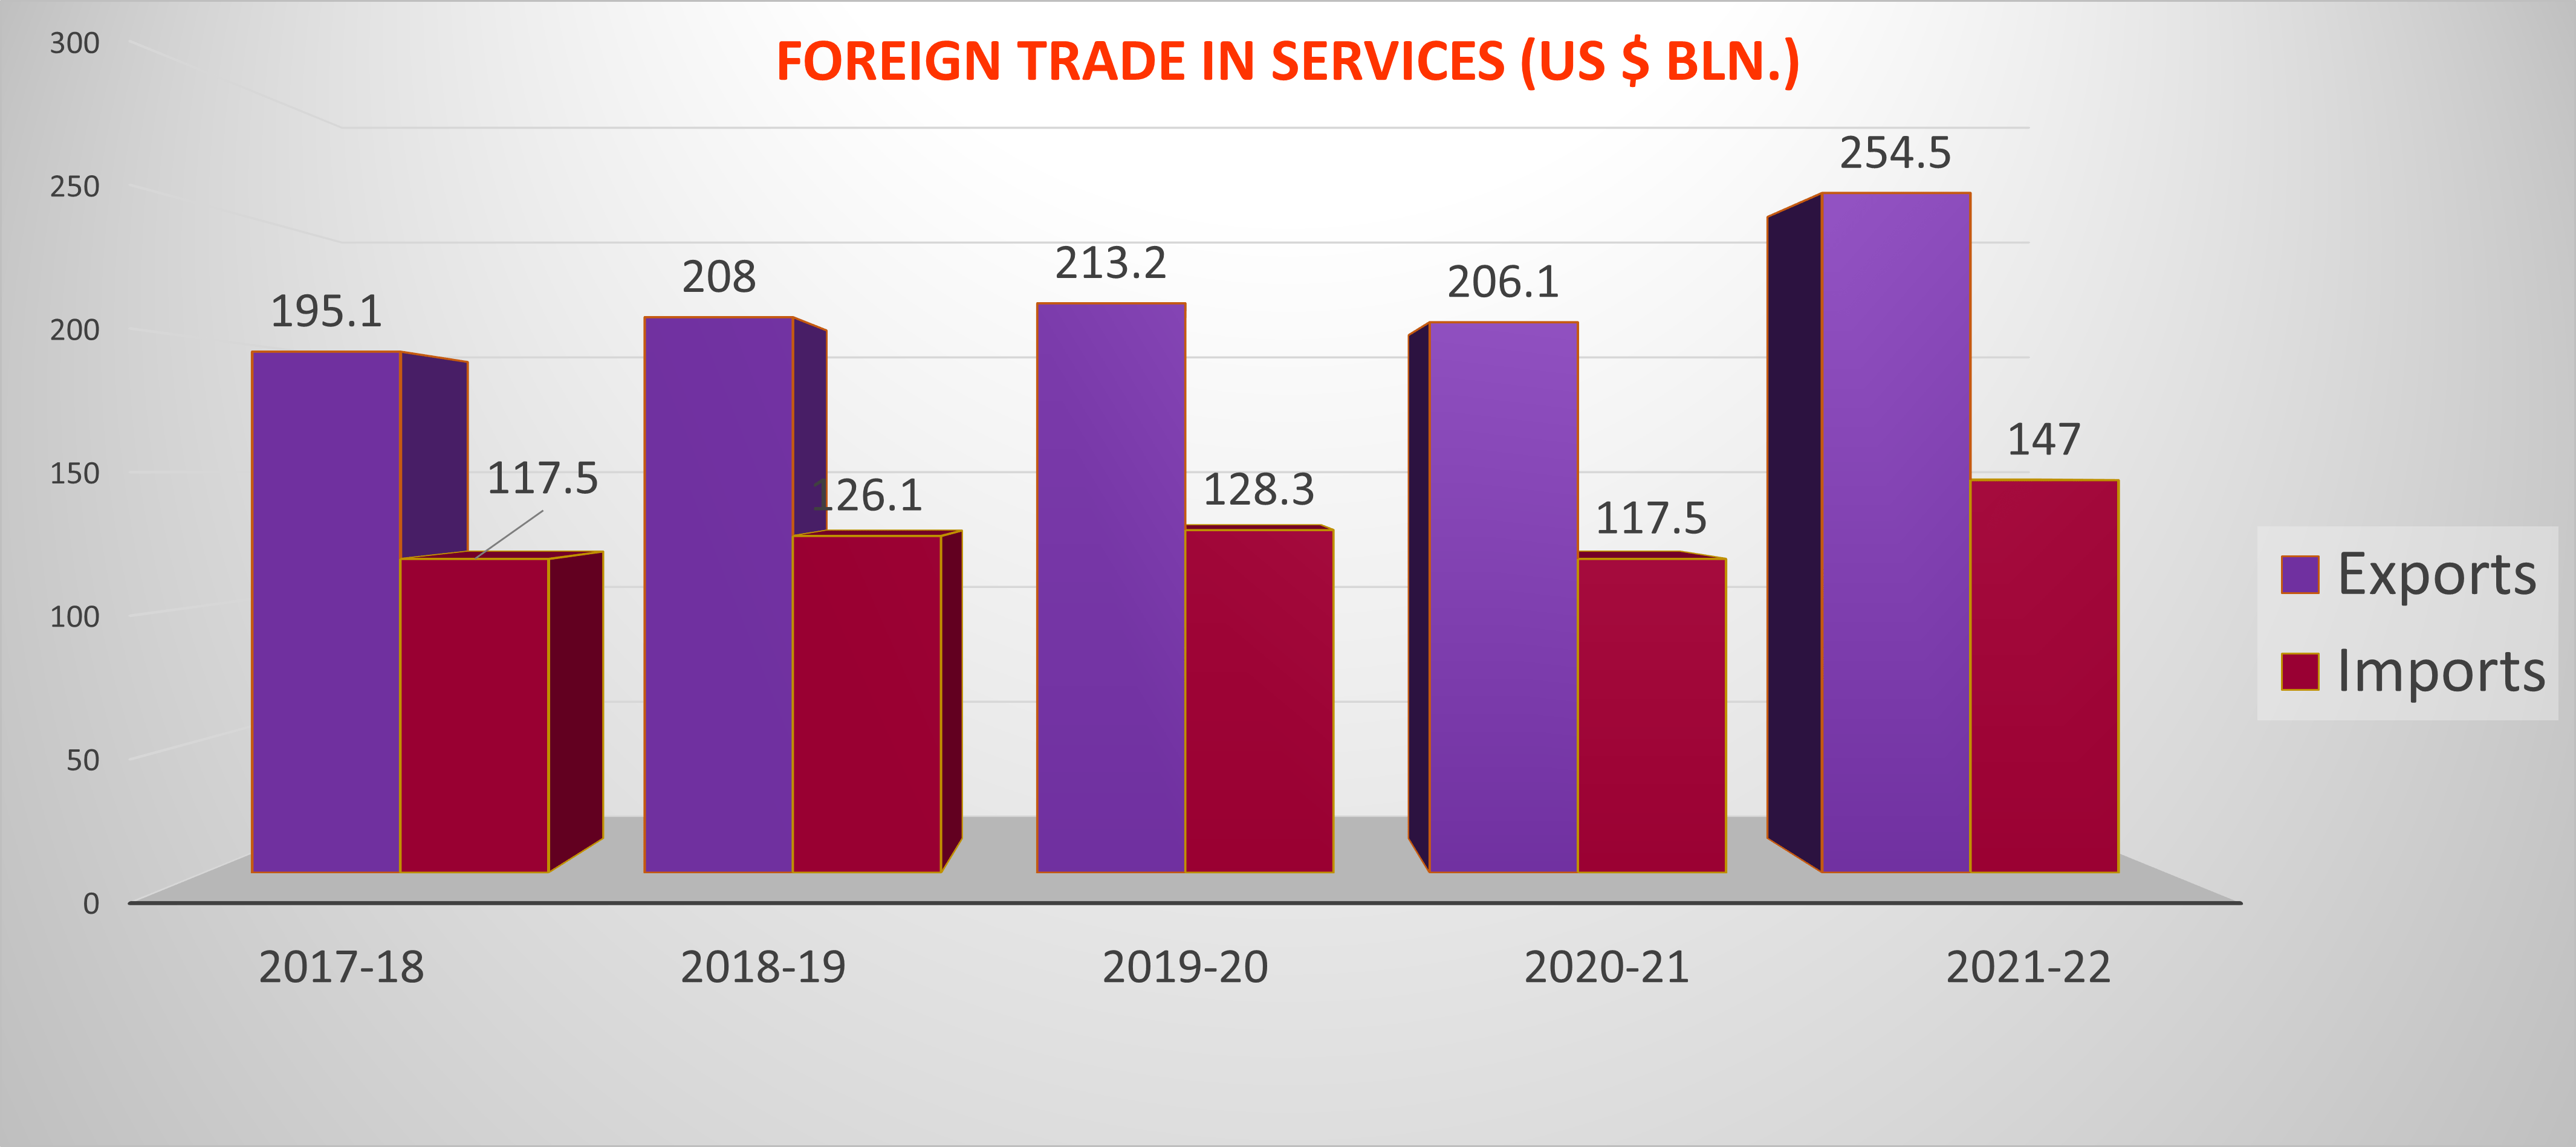 India's foreign trade policy